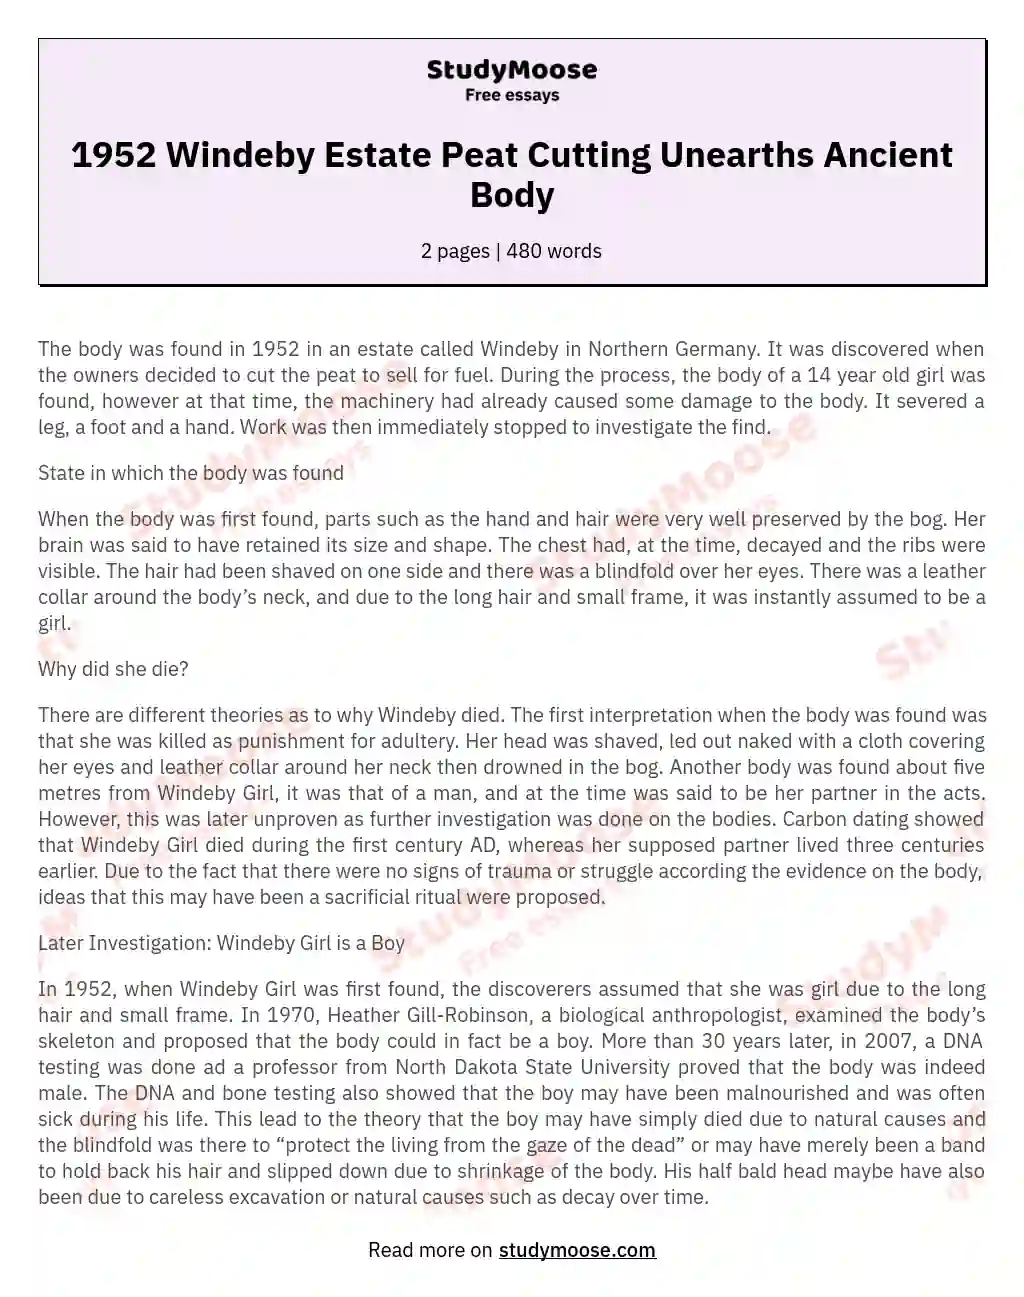 1952 Windeby Estate Peat Cutting Unearths Ancient Body essay